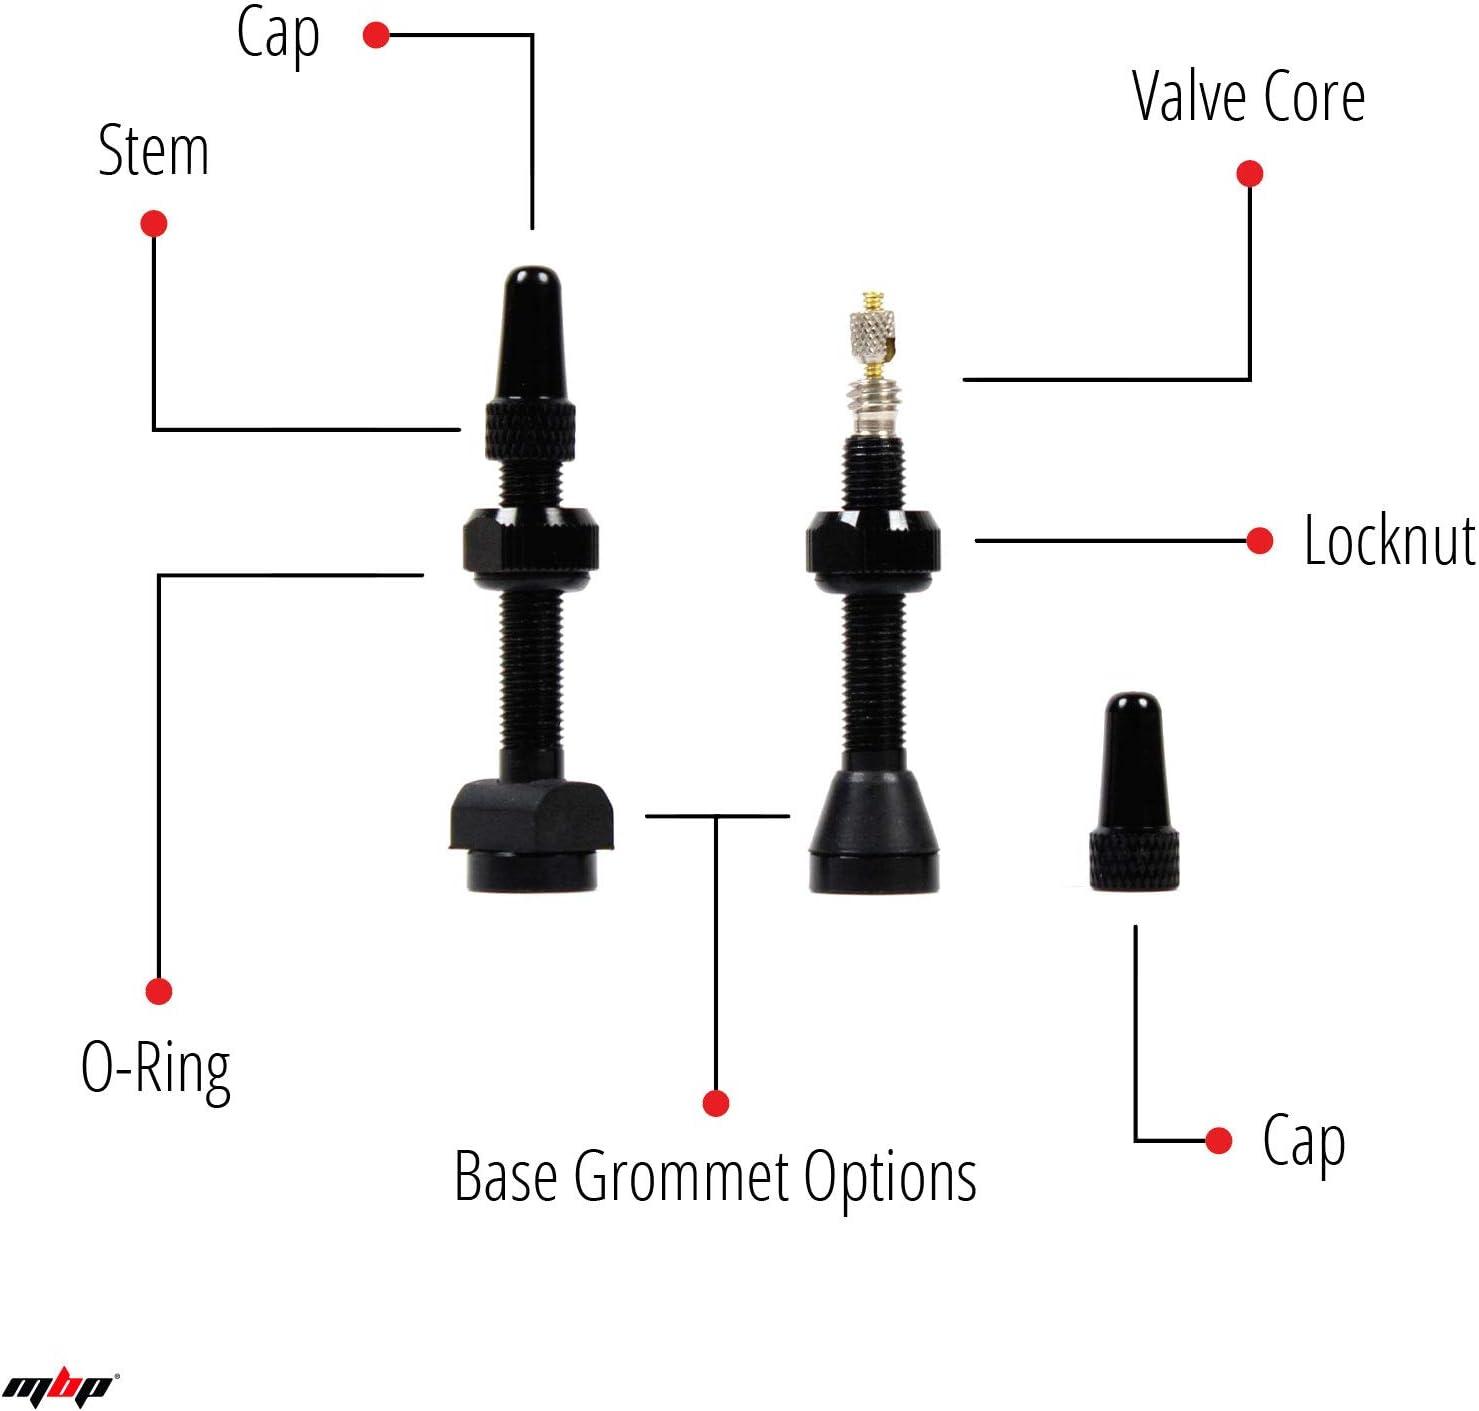 Alloy Tubeless 40mm Bicycle Presta Valve Stems Fits Most Rims with 2 Types  of Grommets Included for Each stem.